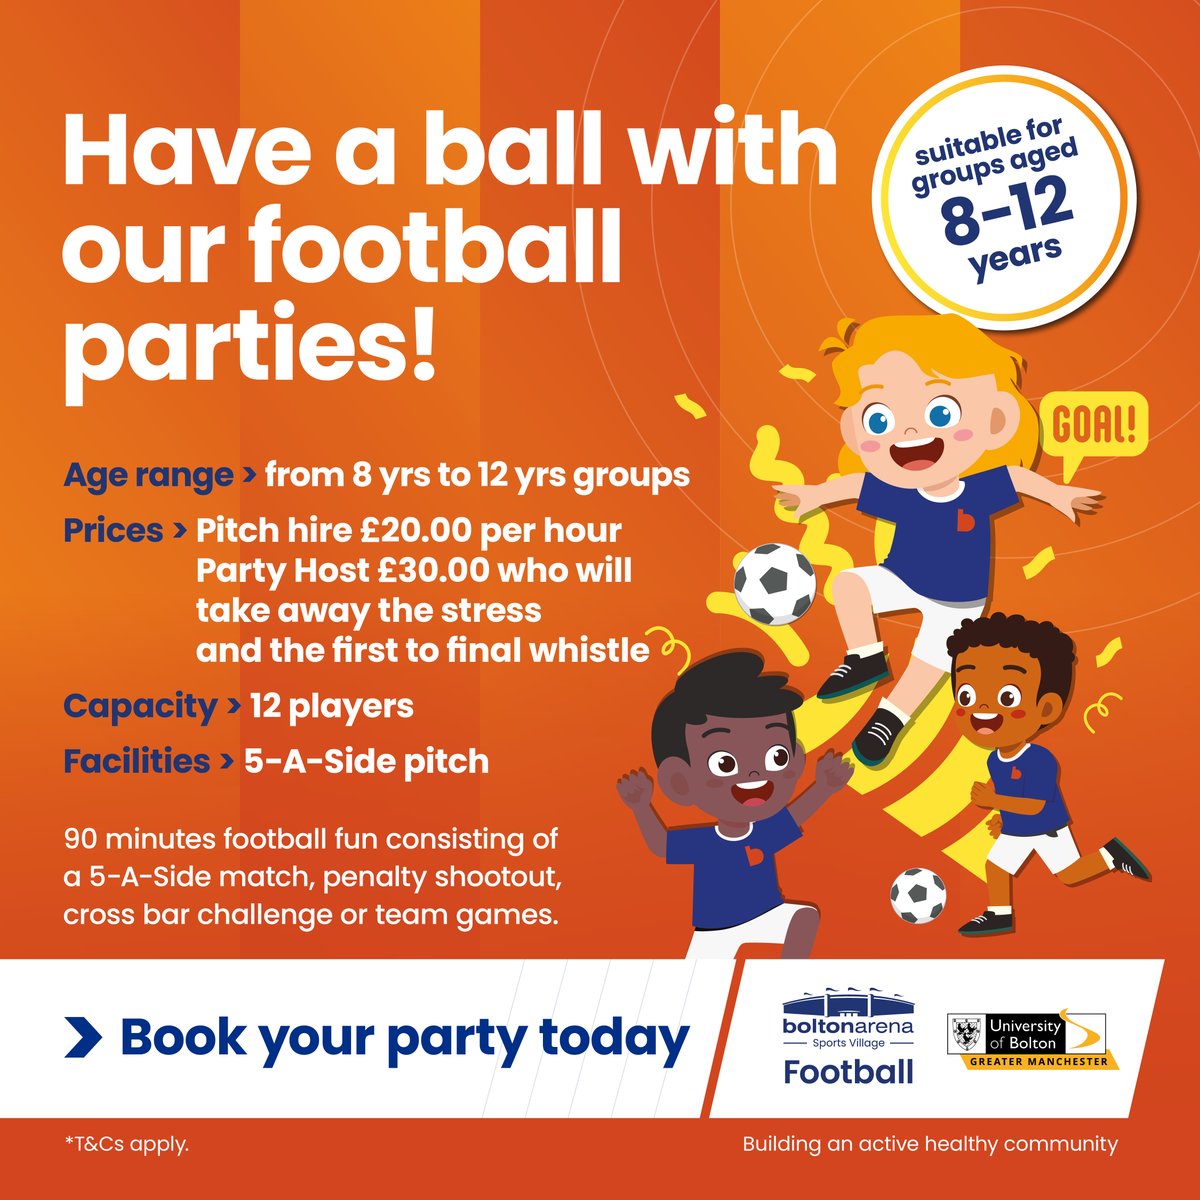 Football Parties at Bolton Arena! 🎂⚽ Fun, friendly and competitive kids football parties now available, 90 minutes of football fun! 😅 4G Pitches 5-a-side Game Penalty Shoot-out Crossbar Challenge Team Games! Find out more: ow.ly/HOfA50Raugs